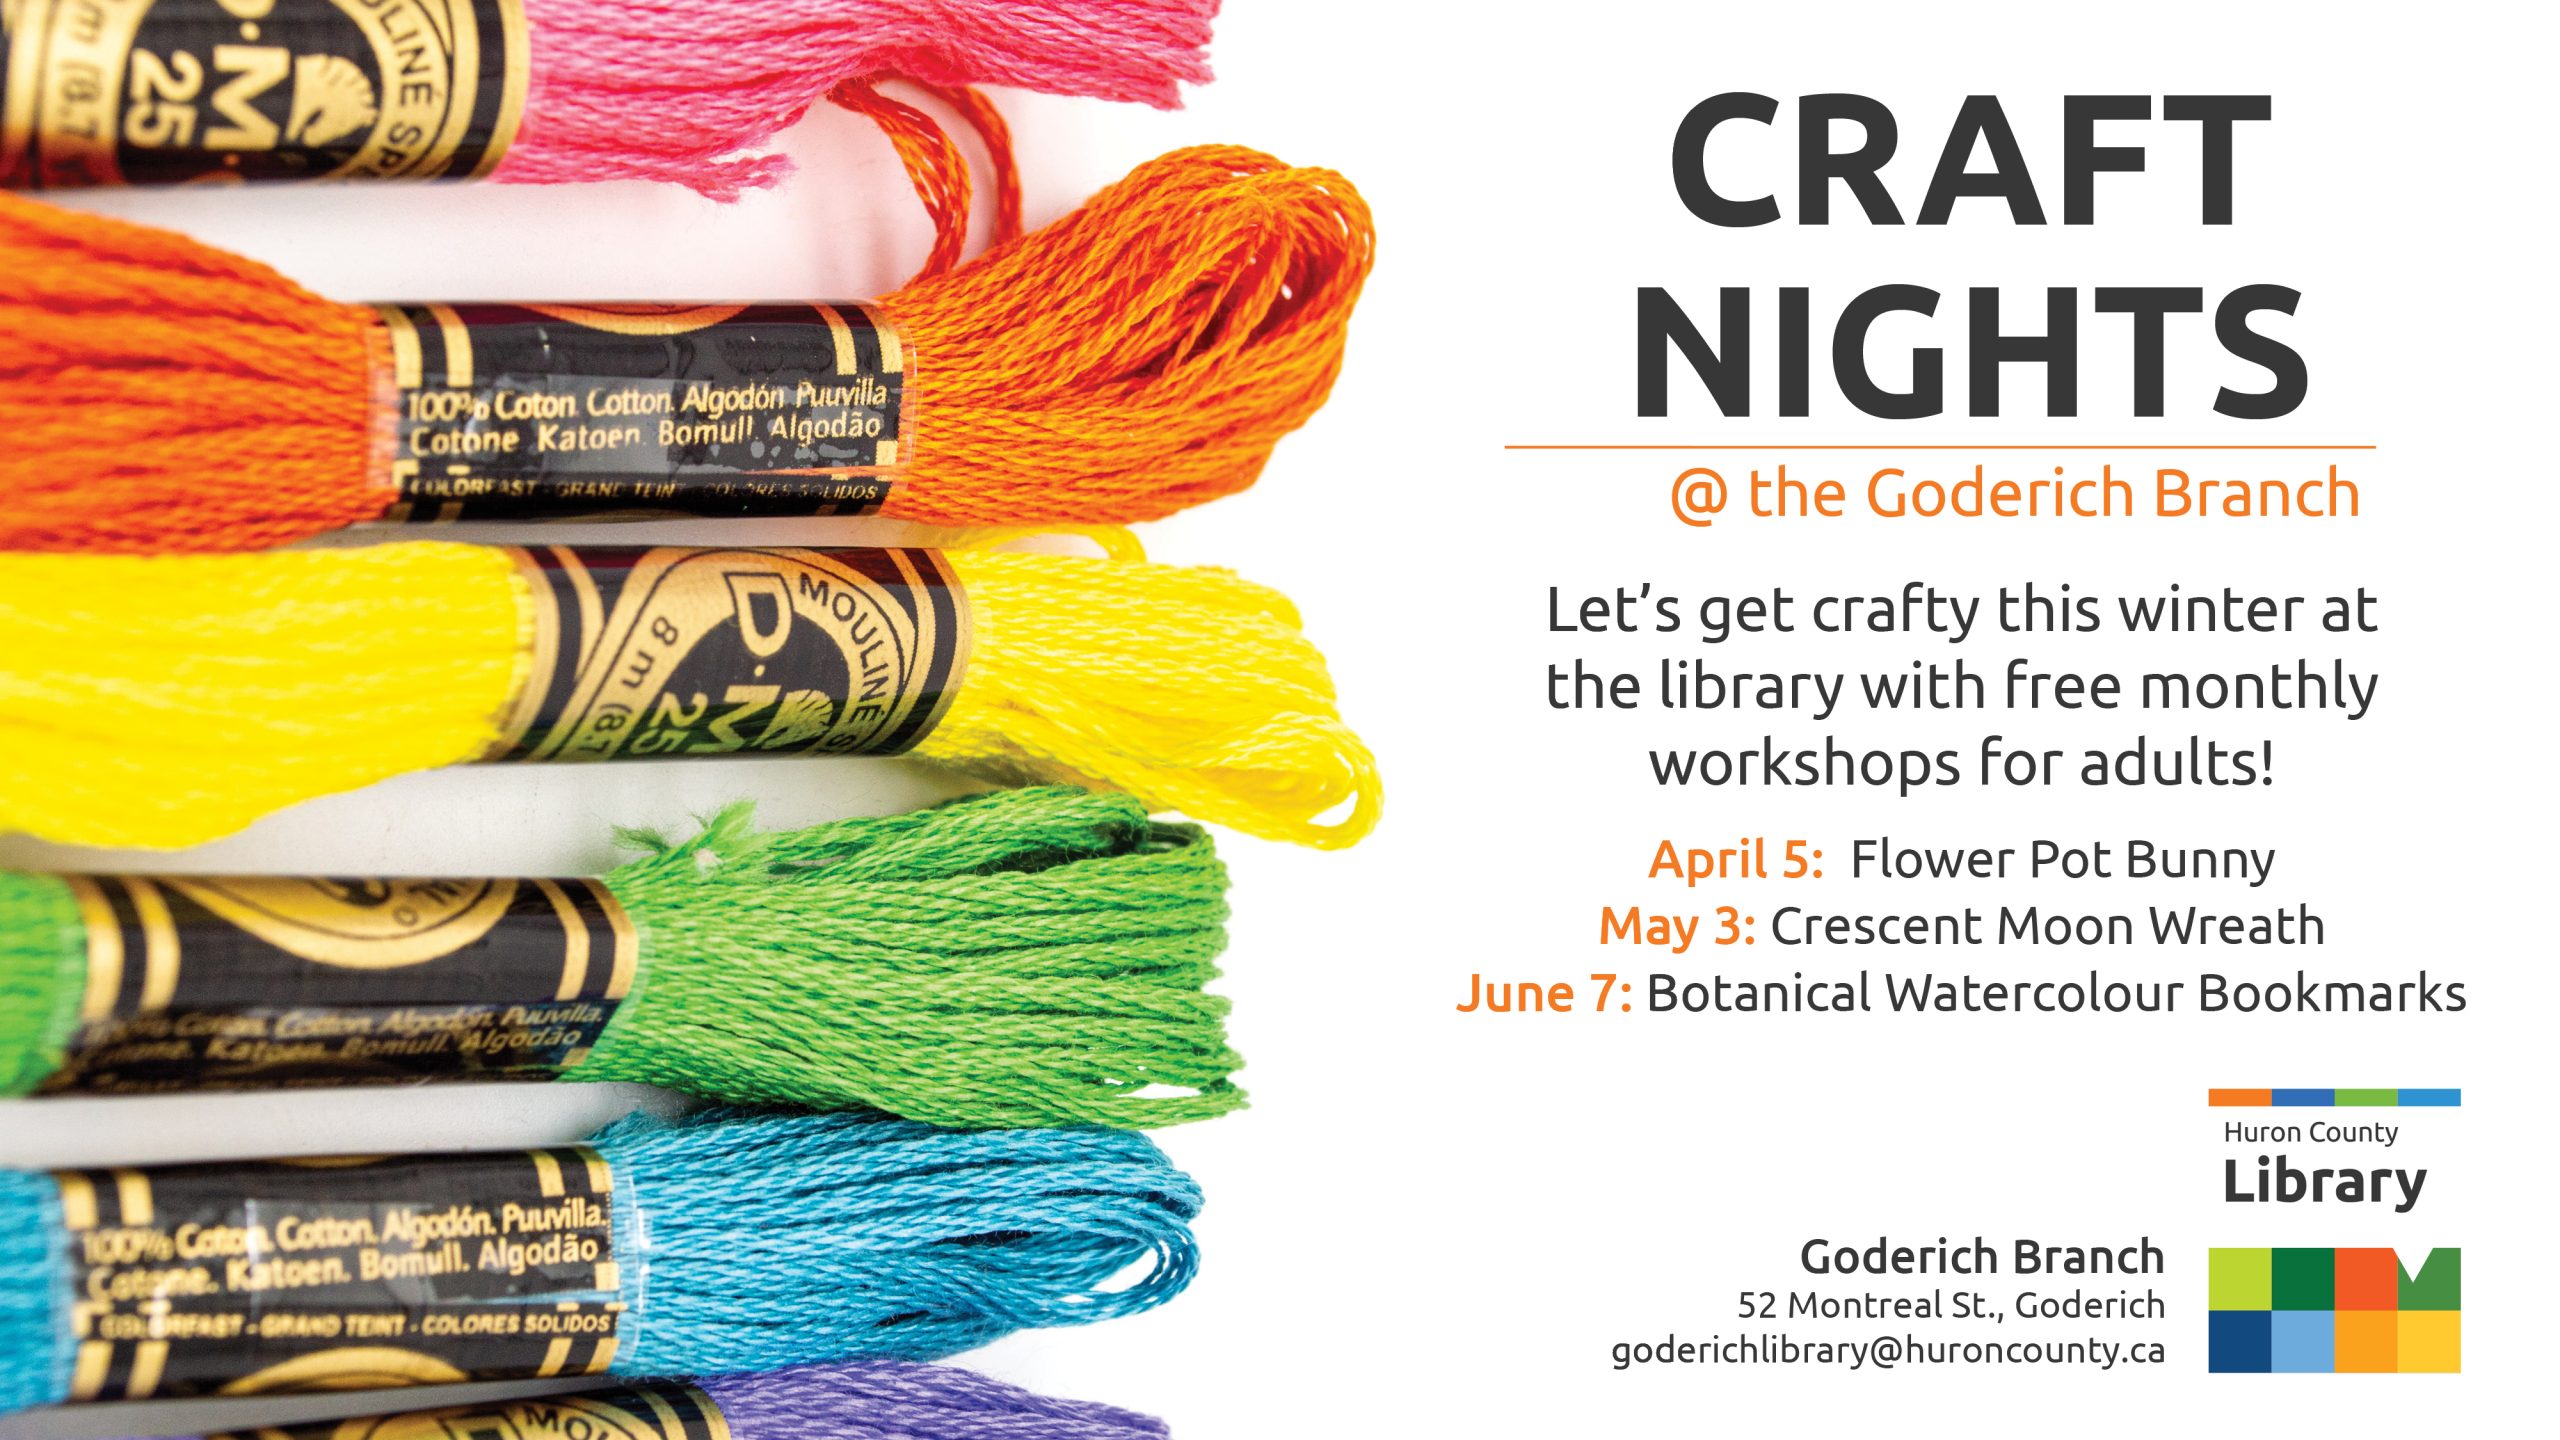 Image of different colours of embroidery thread with text promoting craft nights at Goderich Branch